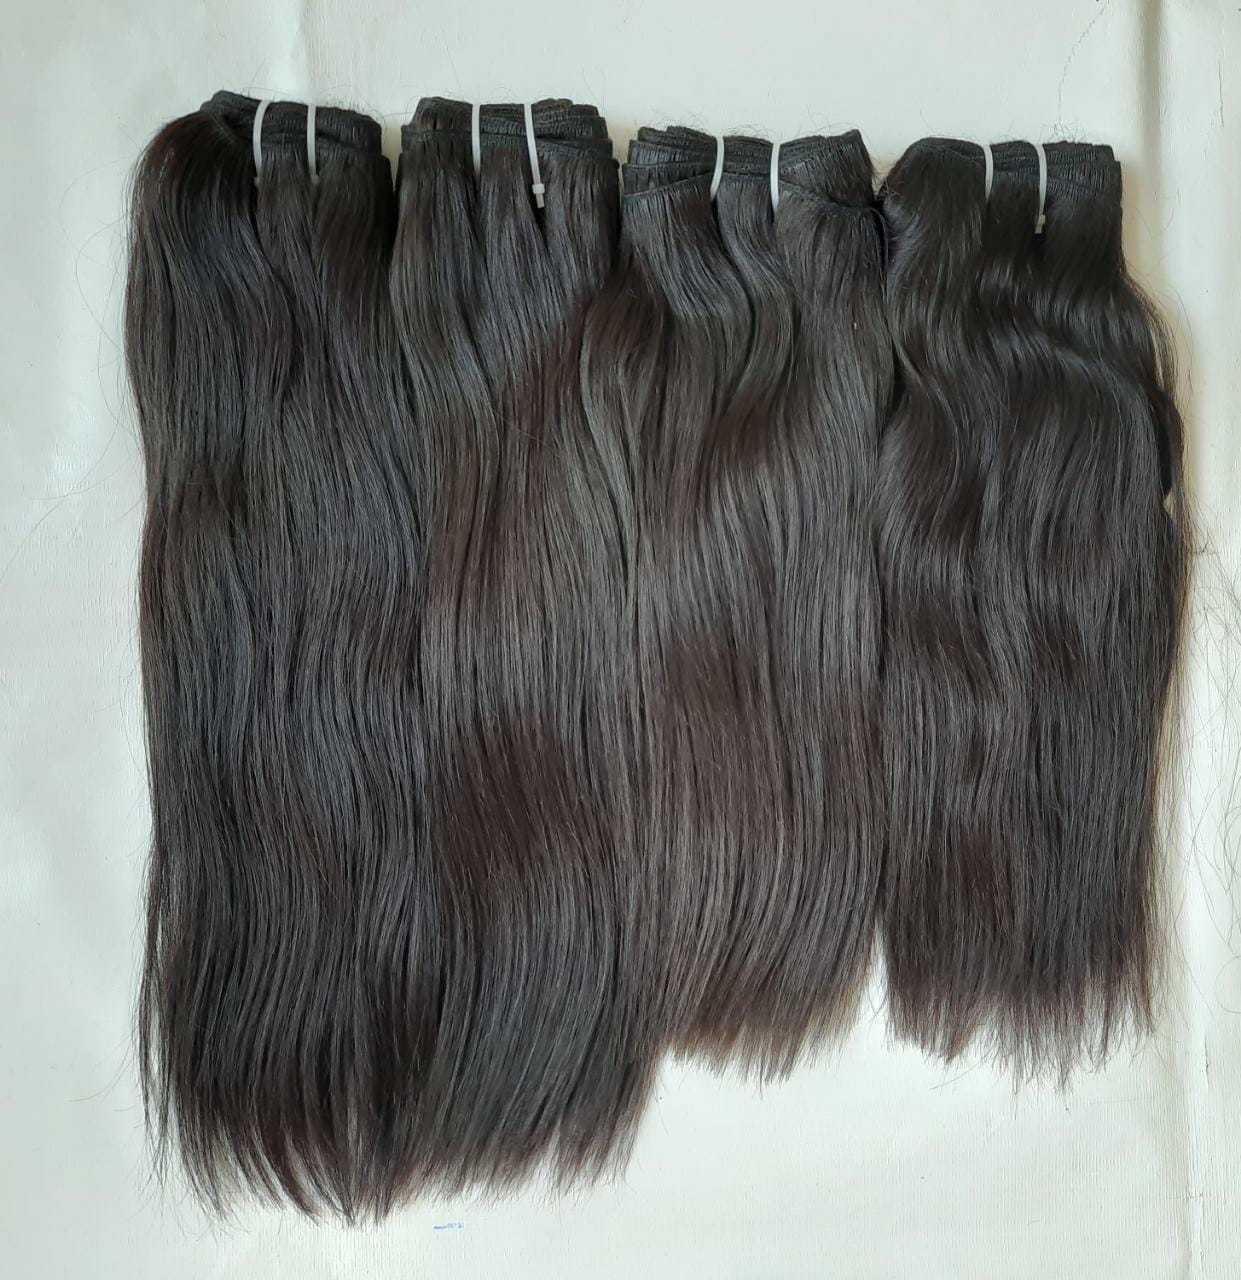 Top Quality 100% Virgin Straight and wavy Human Hair